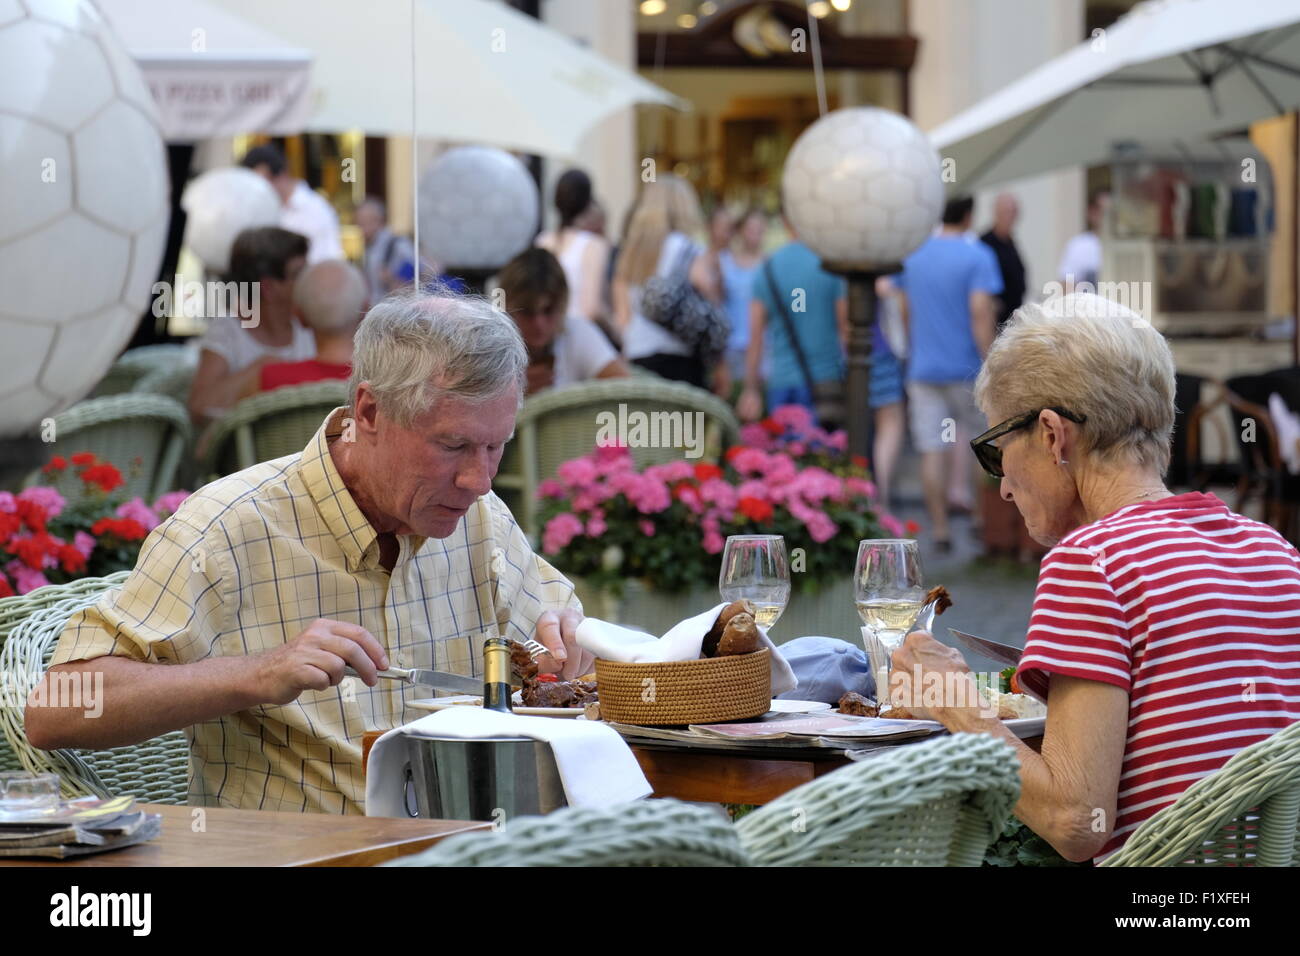 Older people eating at an outdoor restaurant in Prague, Czech Republic, Europe Stock Photo